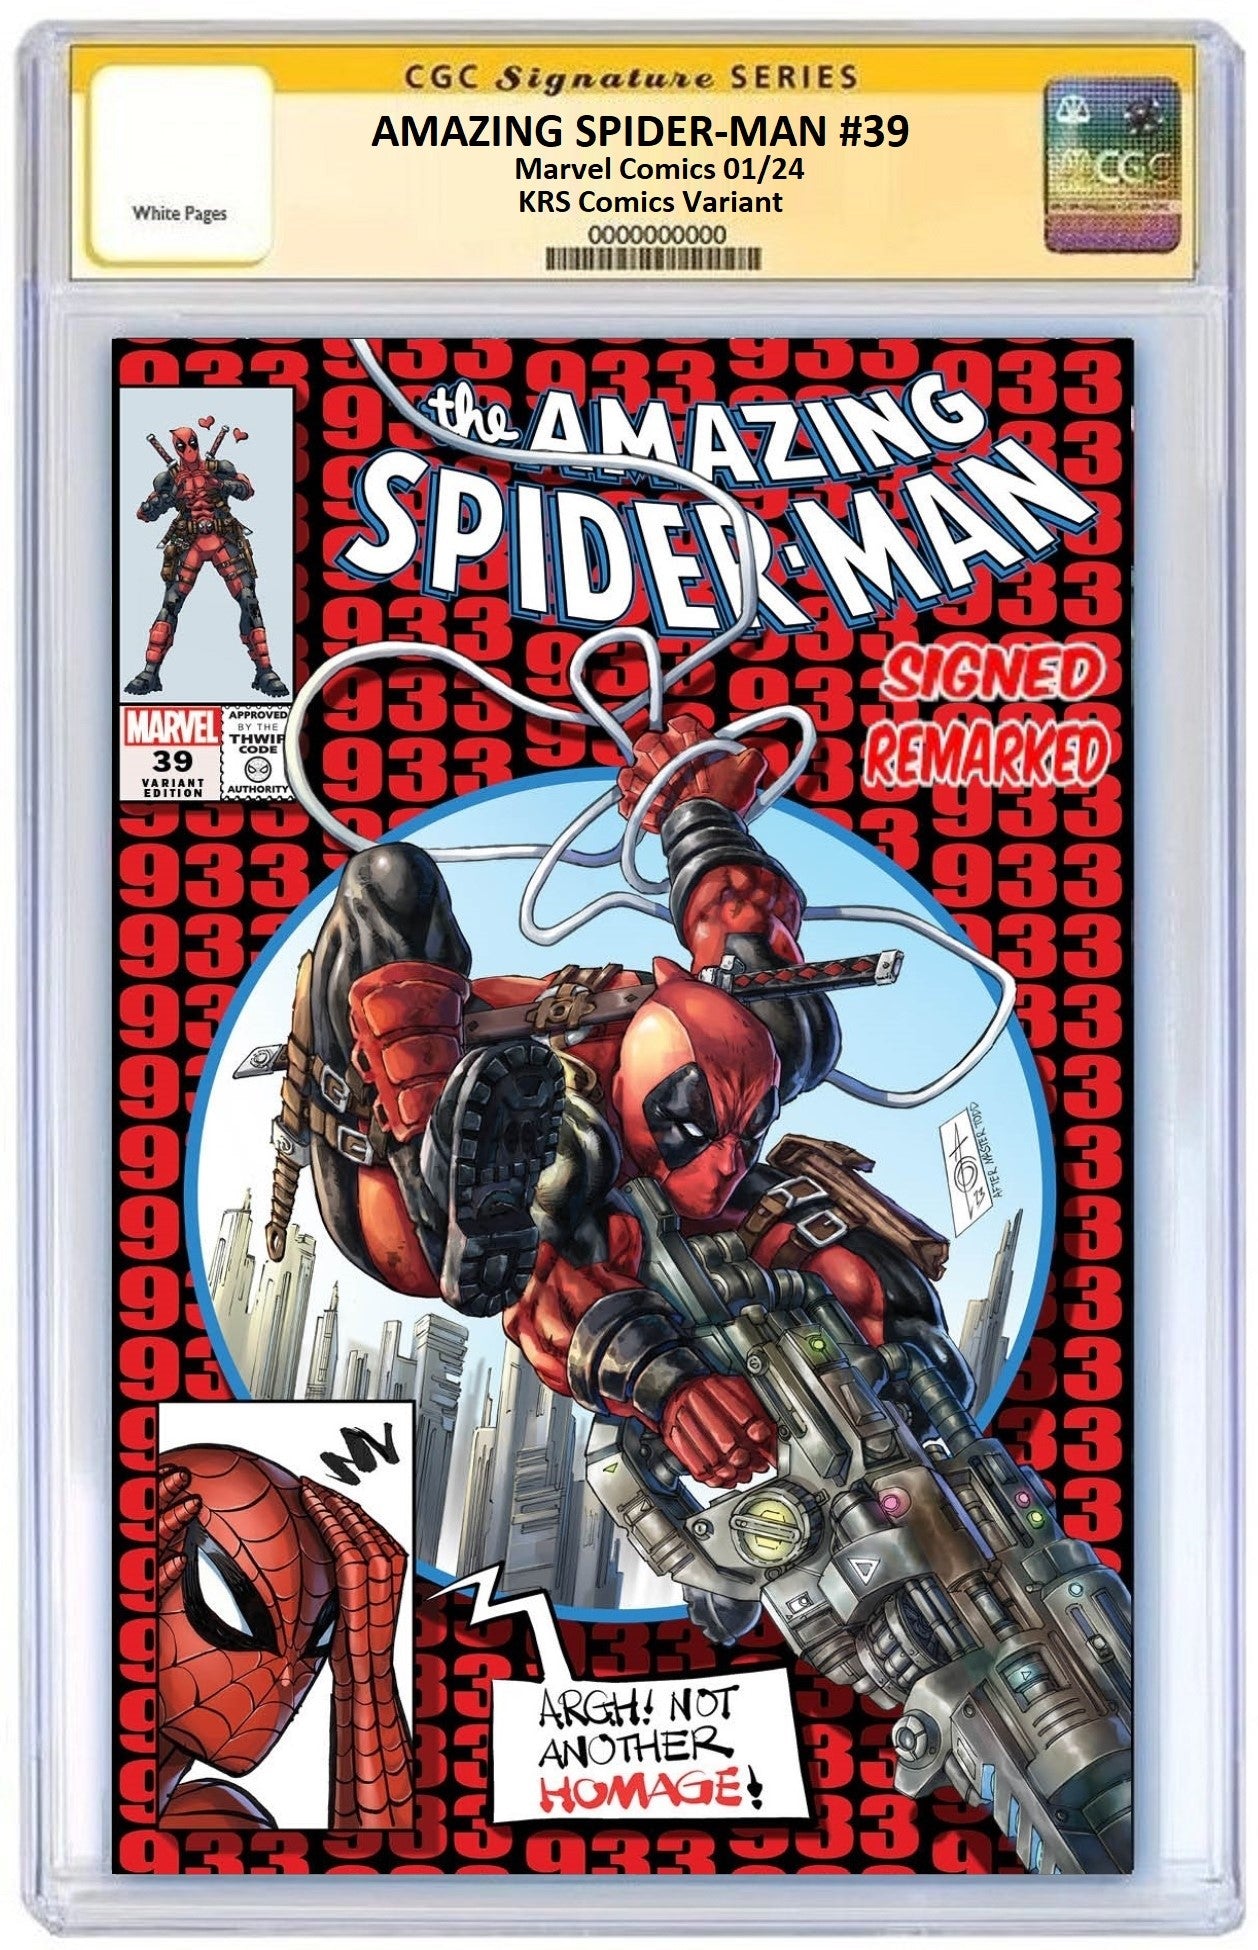 AMAZING SPIDER-MAN #39 ALAN QUAH RED TRADE DRESS ANTI-HOMAGE VARIANT LIMITED TO 3000 COPIES CGC REMARK PREORDER